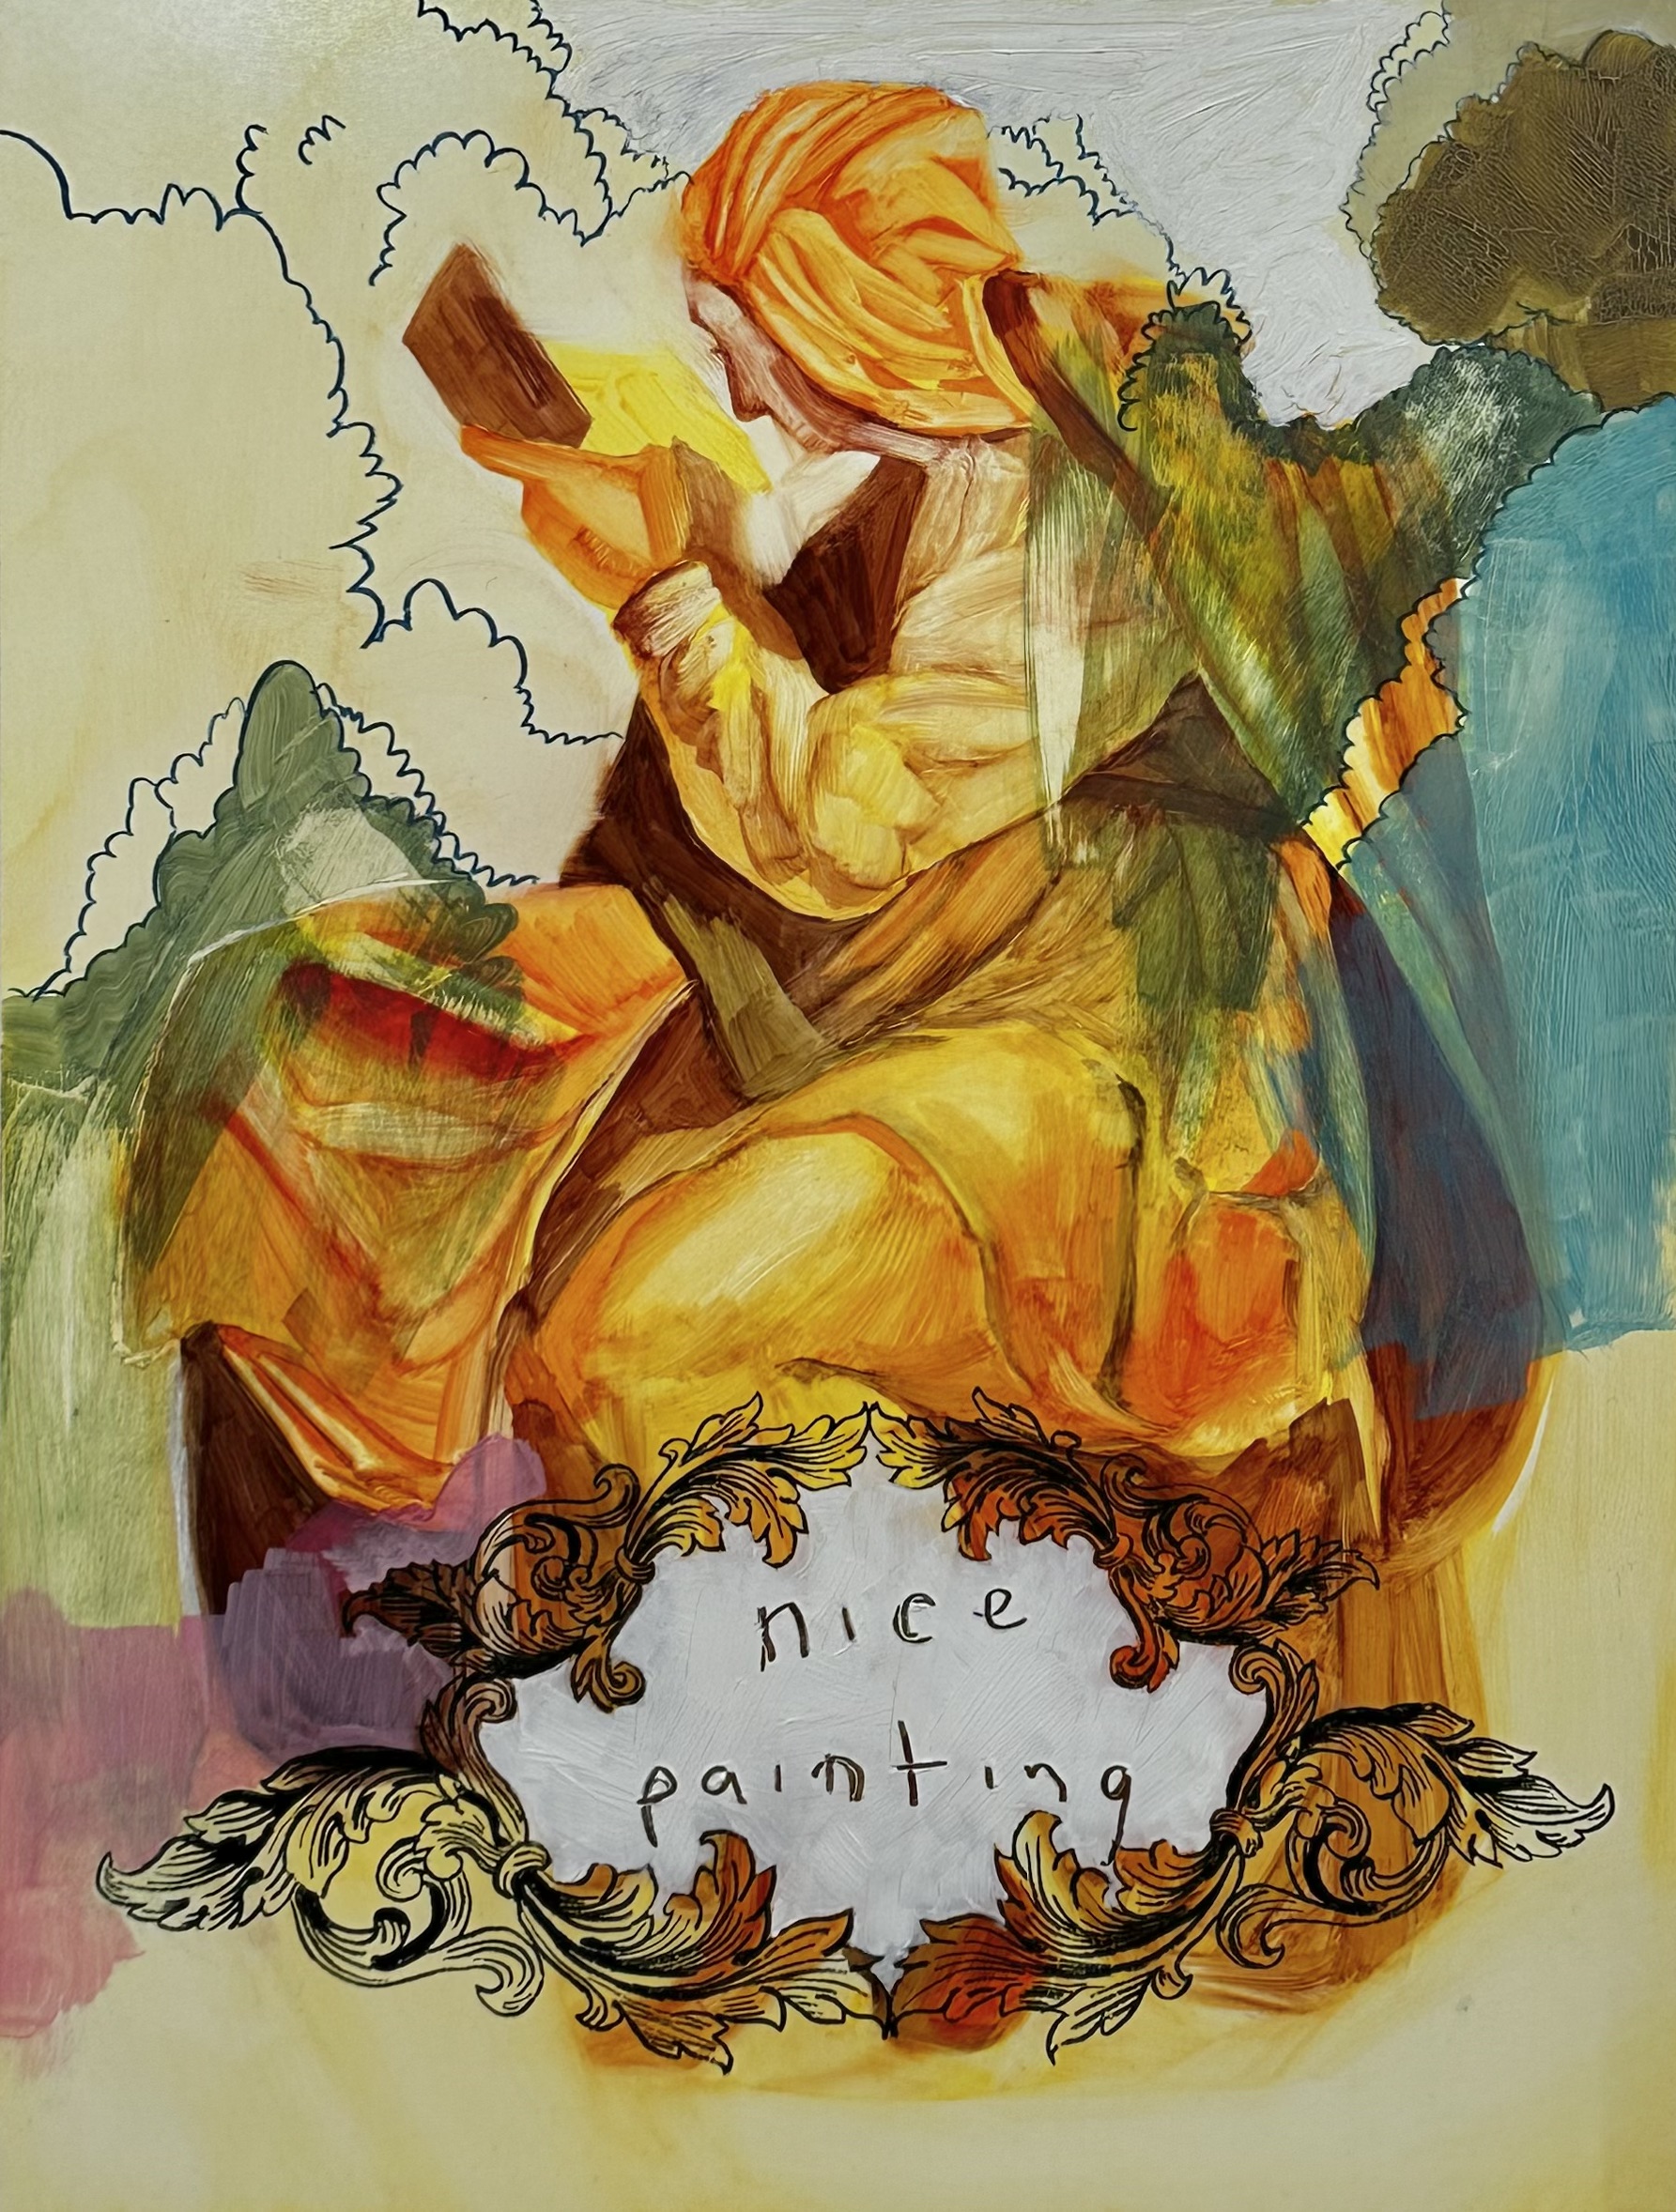  A female figure site with her head slightly turned away, reading from a book in her hands. Around her, crude clouds are drawn and some filled in with color. Over her feet is an ornamental frame with the words "Nice Painting" written inside. 